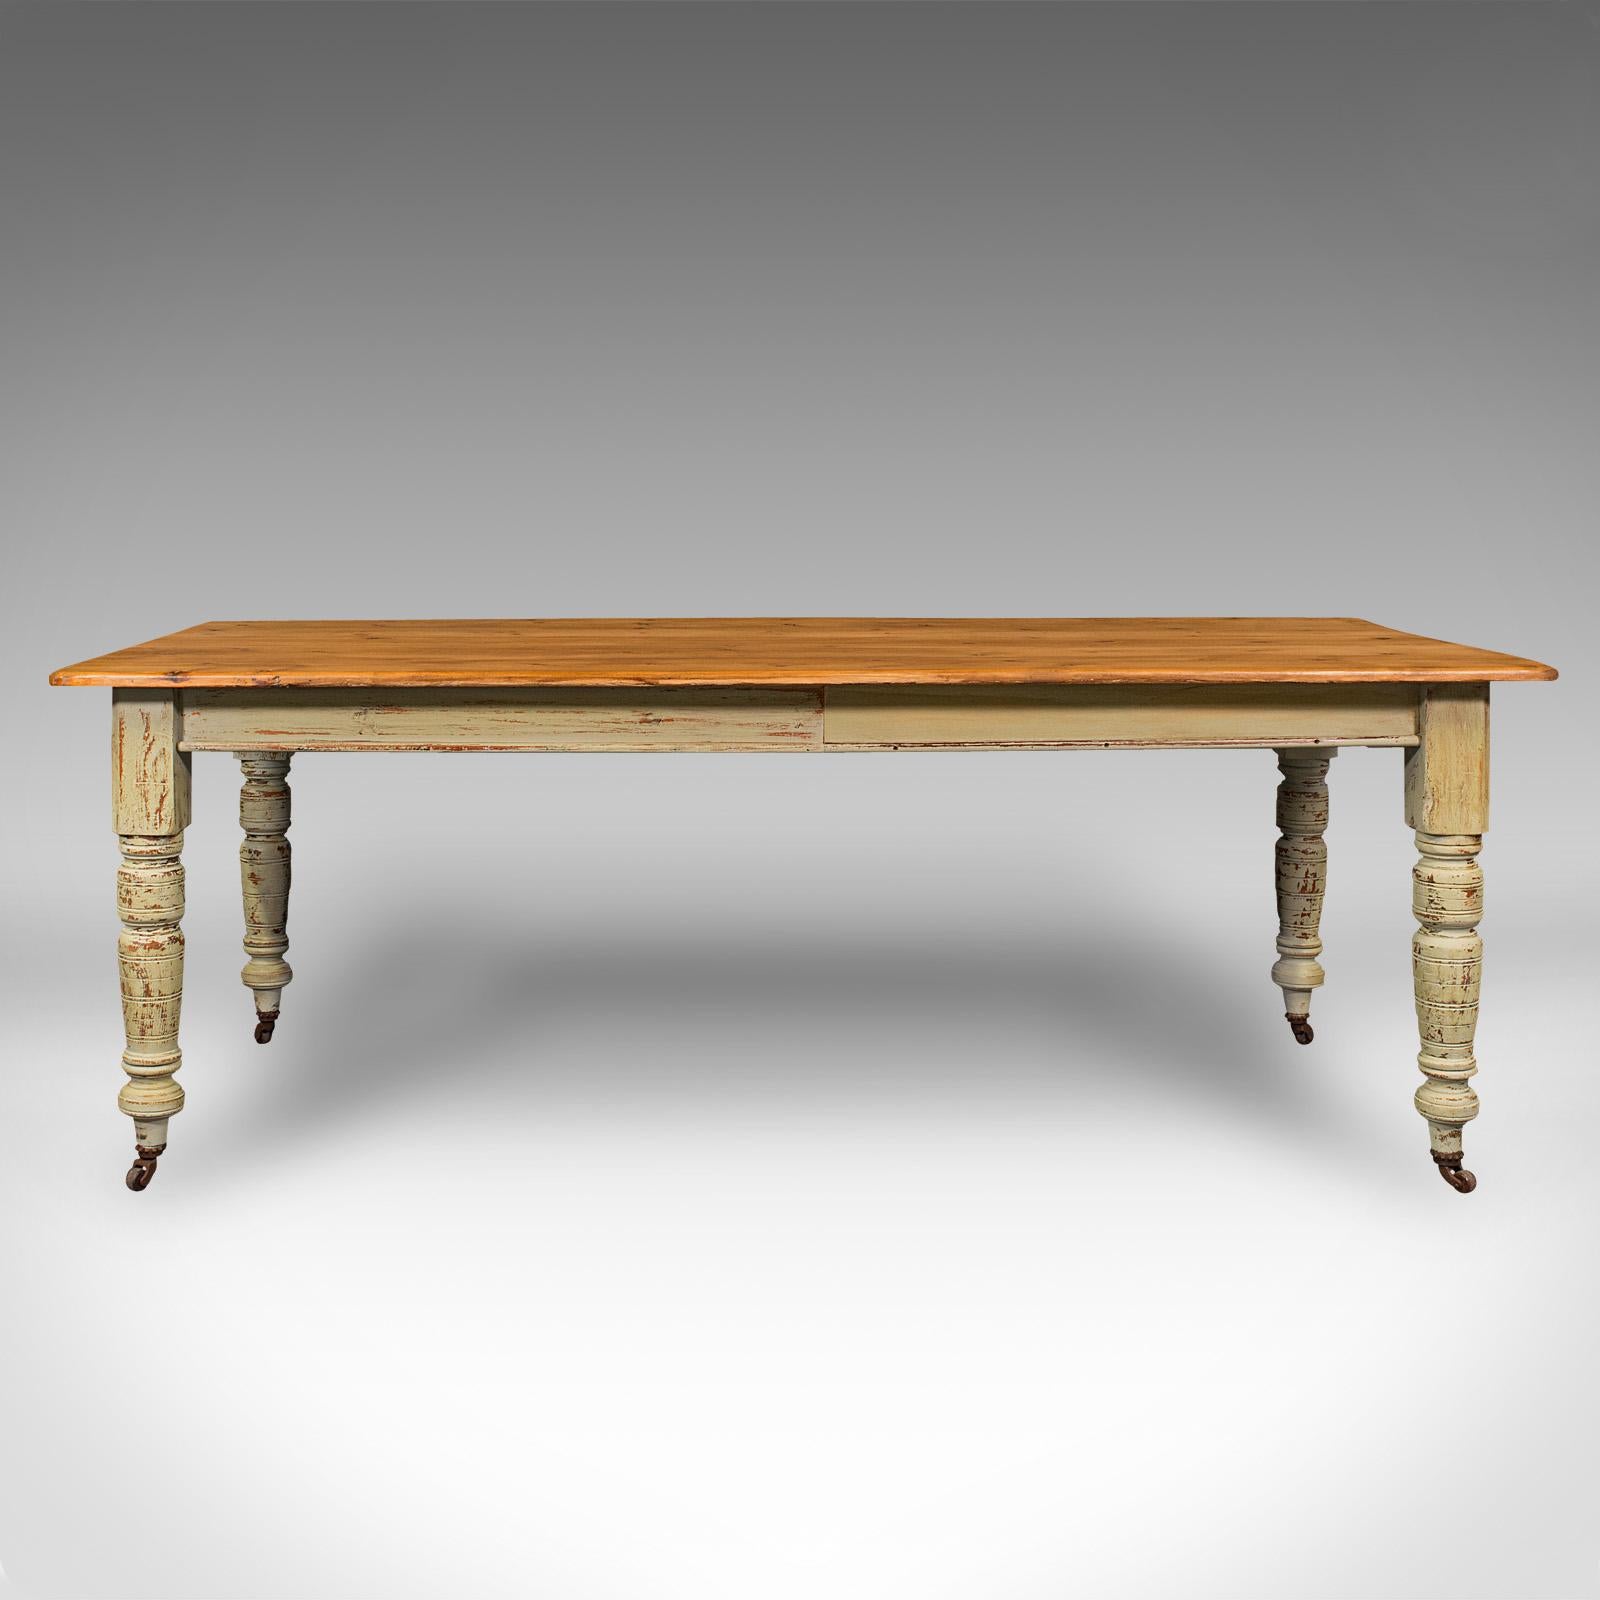 19th Century Antique Farmhouse Table, English, Pine, 6 Seat, Dining, Kitchen, Victorian, 1900 For Sale